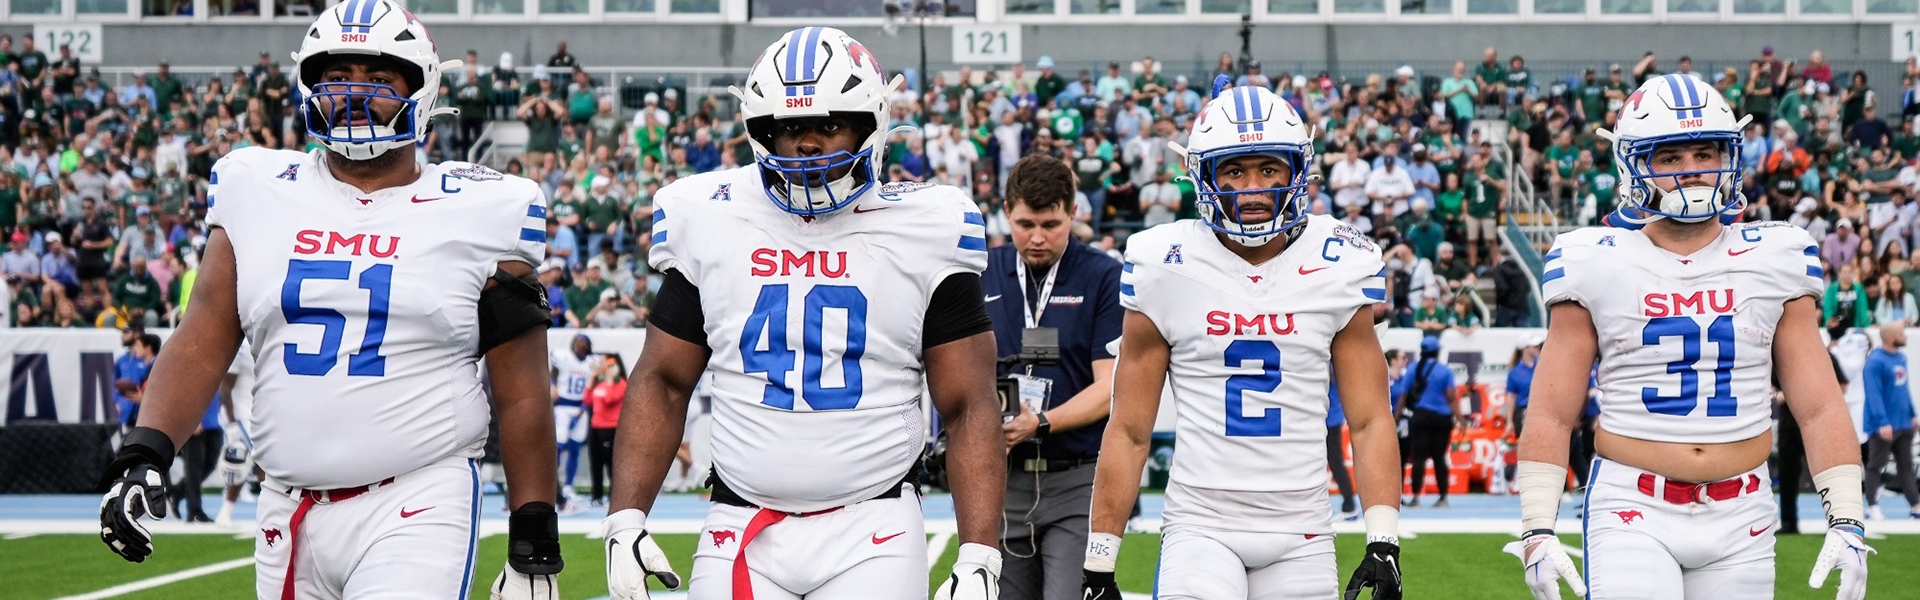 SMU Football players going out for the coin toss